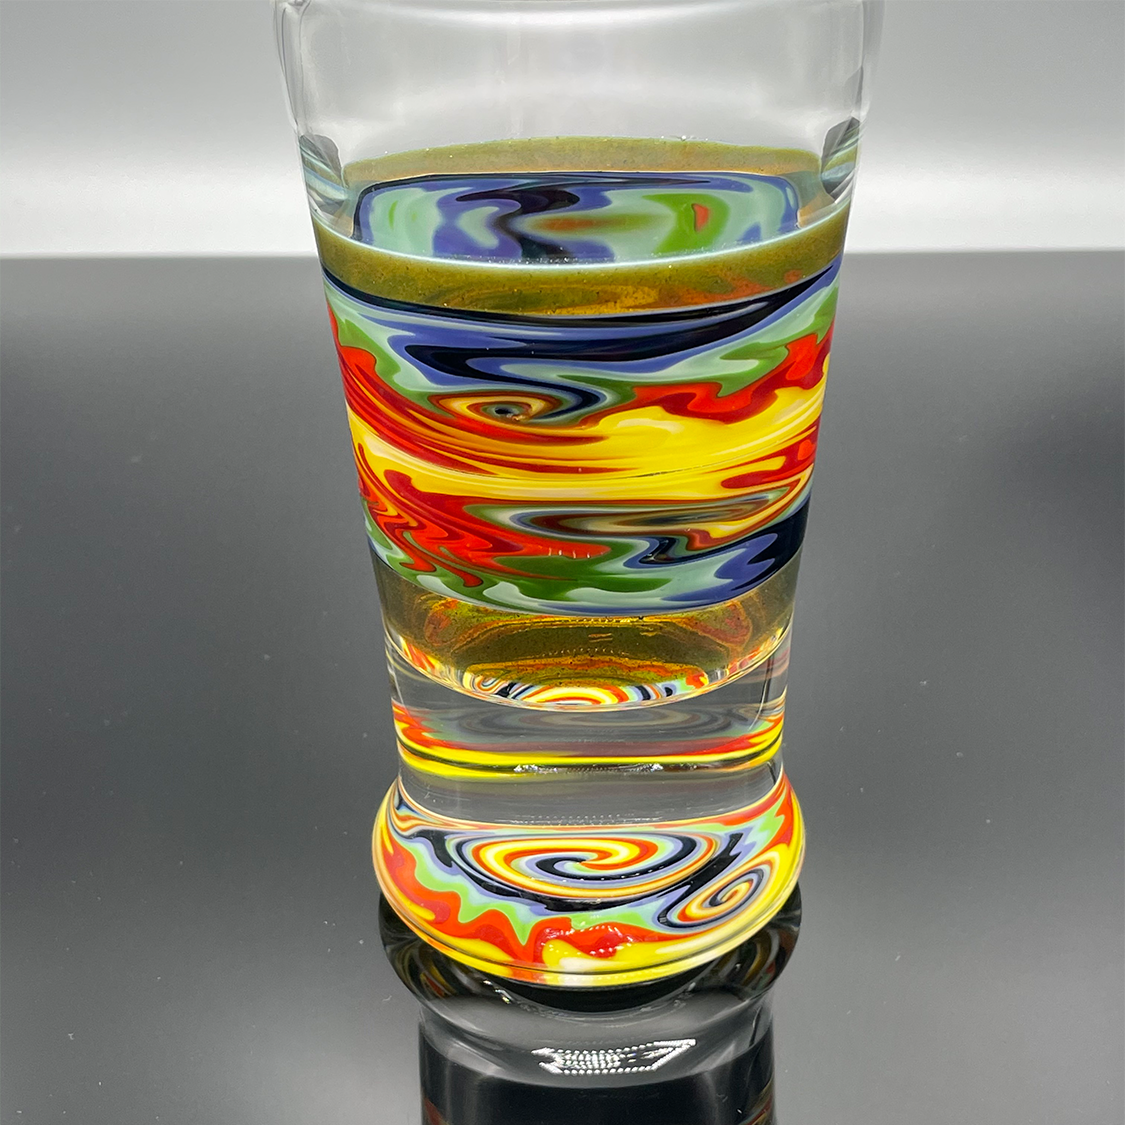 Multi-color beer glass with colored sections on the wall and bottom